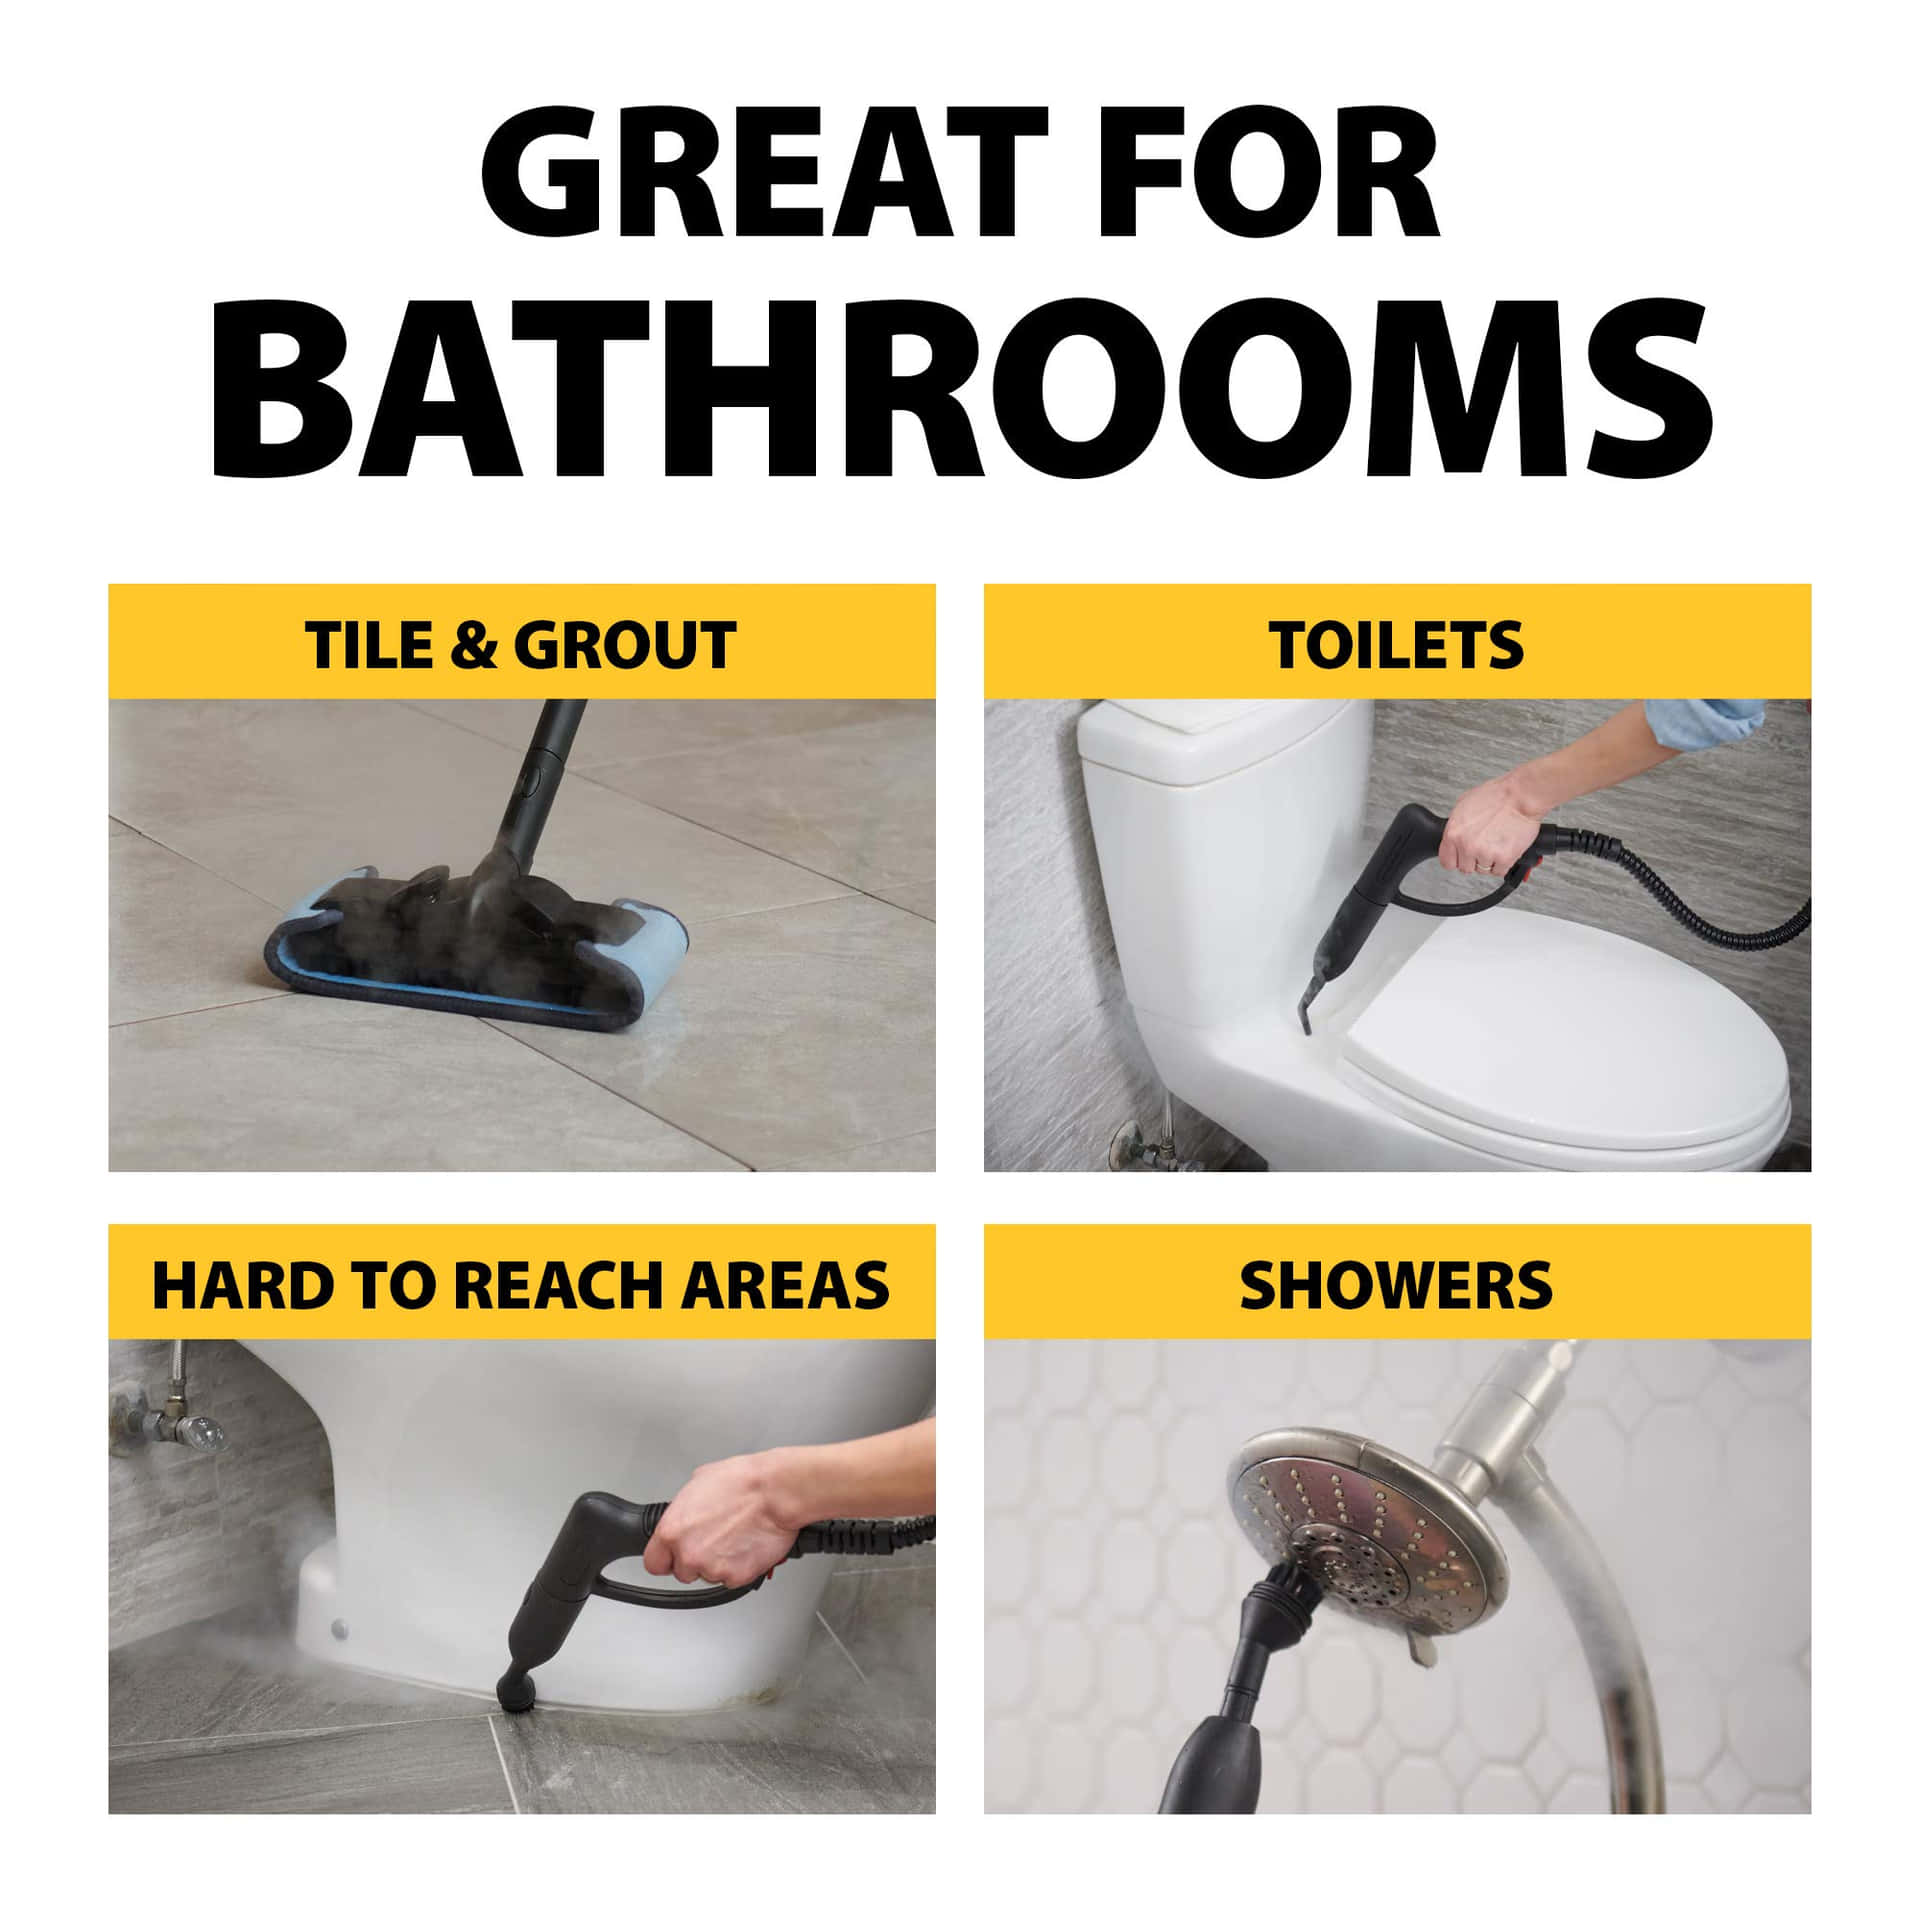 Cleaning Great For Bathrooms Background